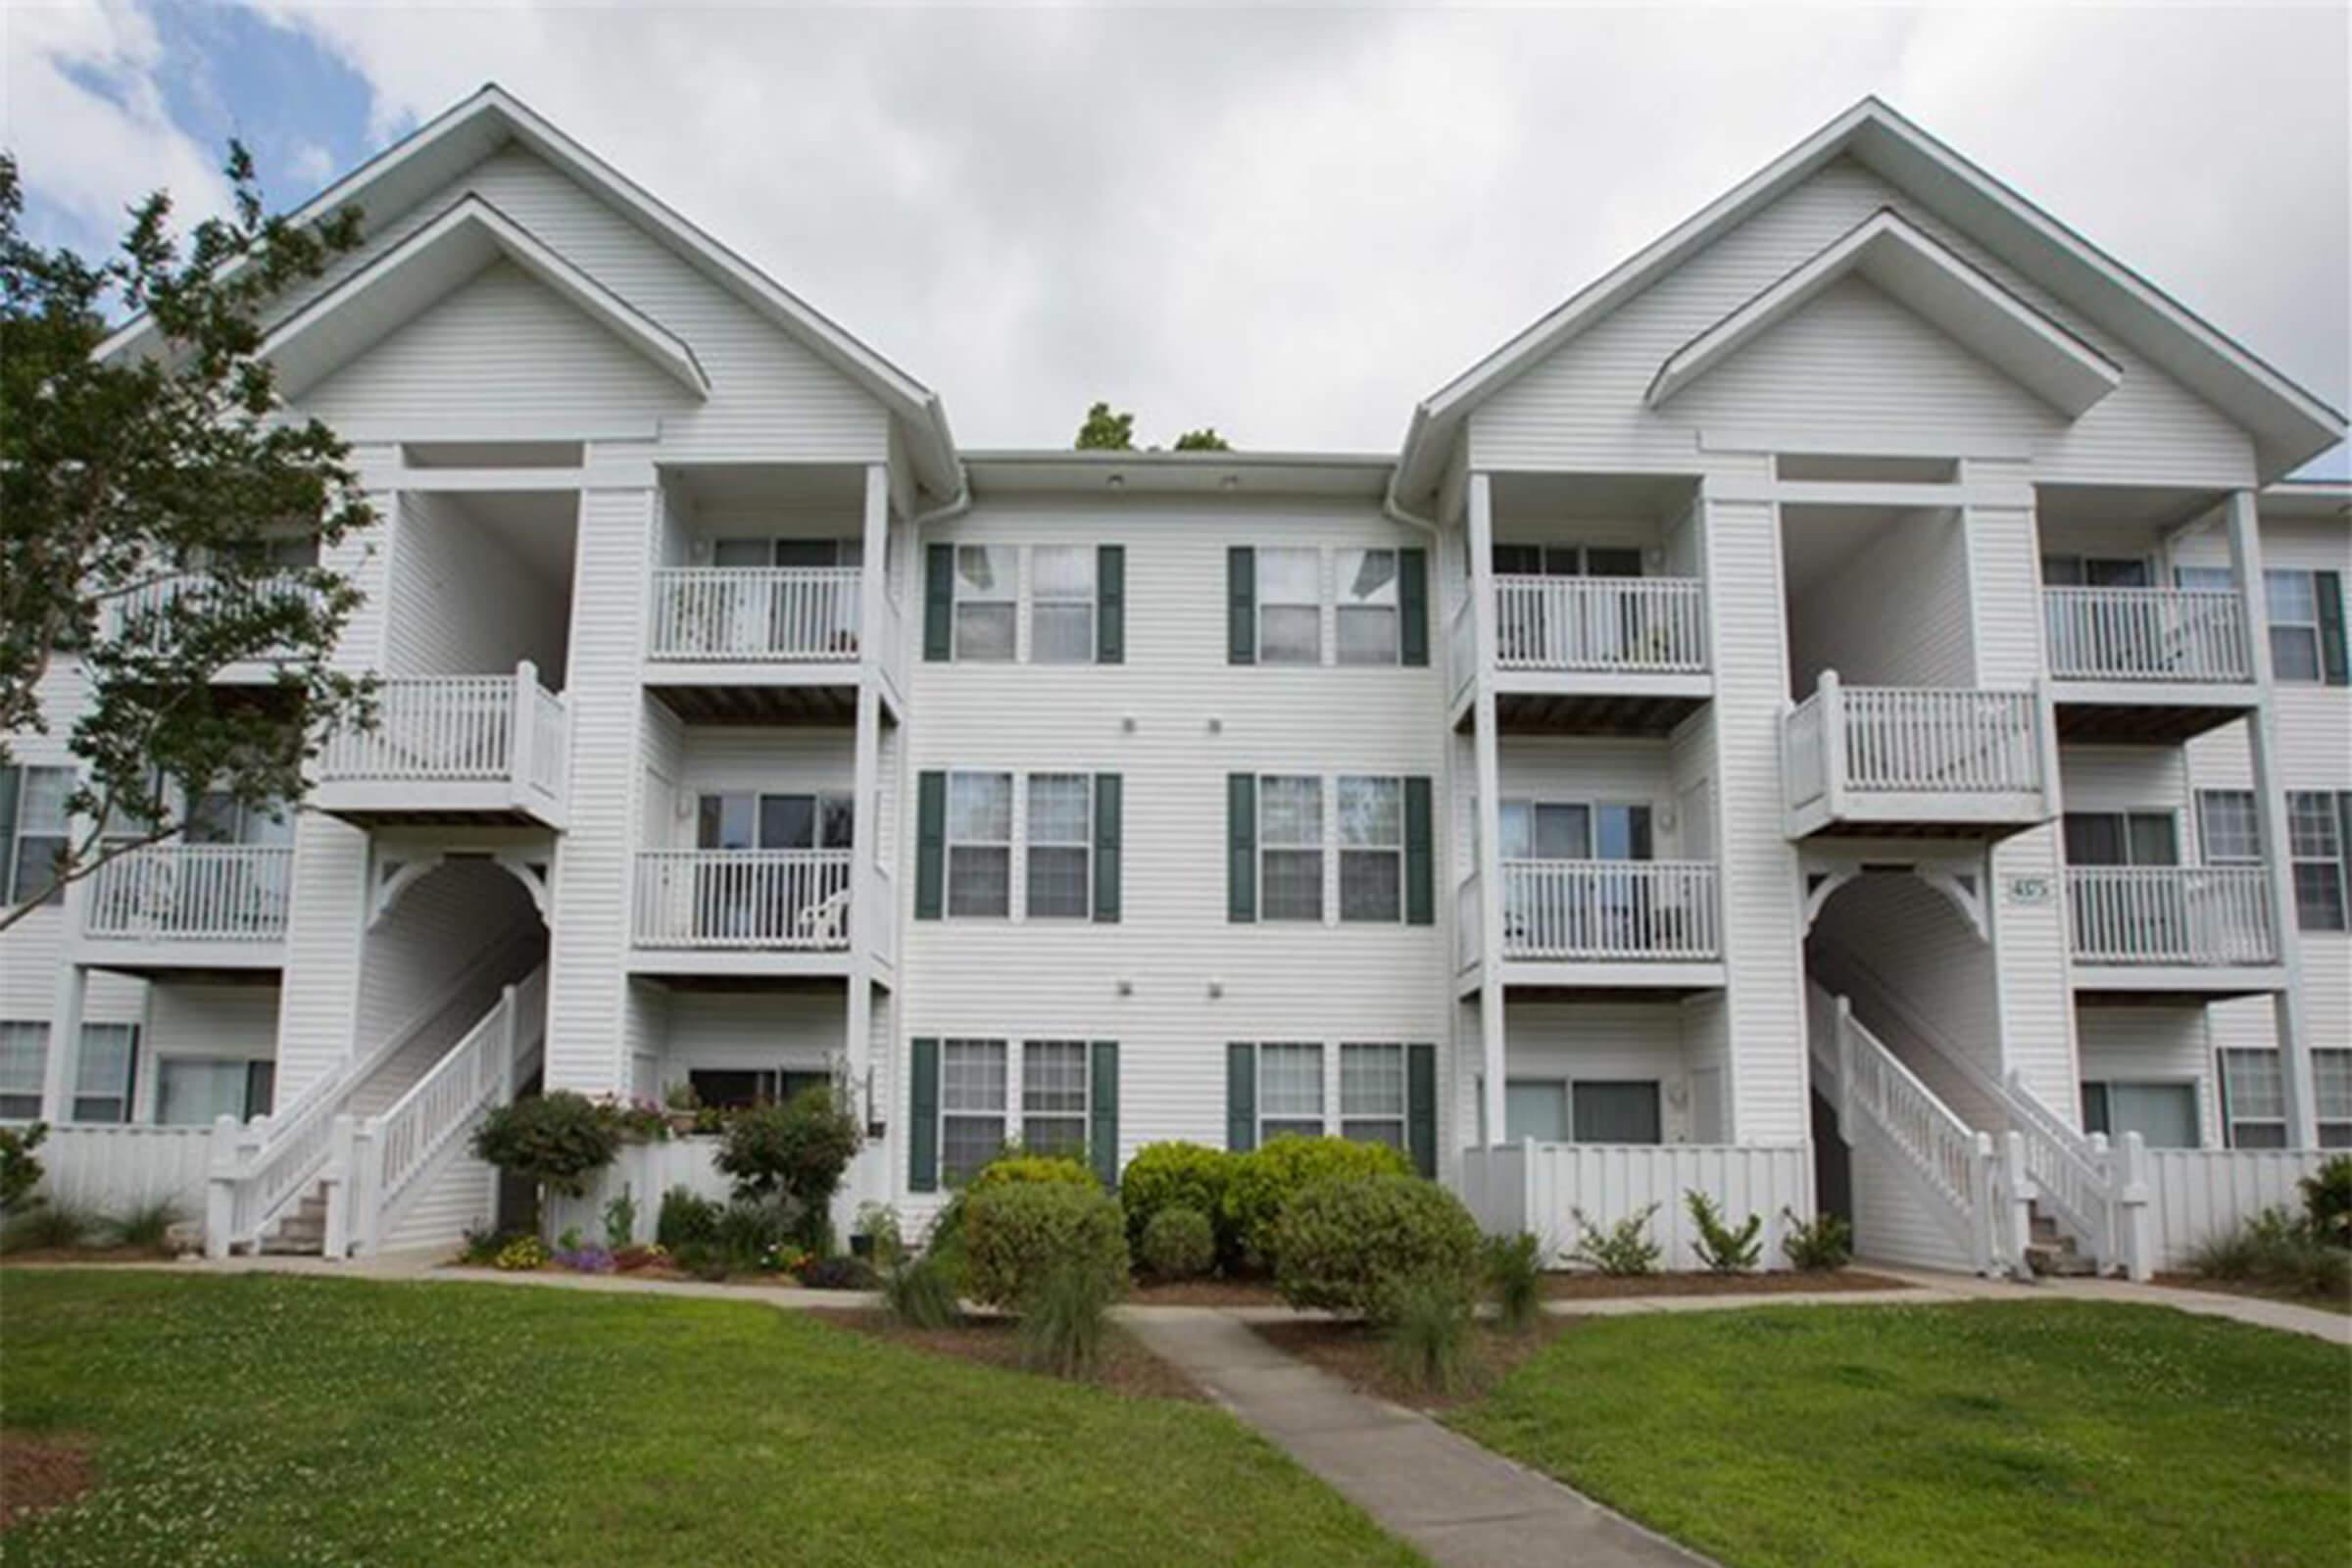 WELCOME HOME TO BIRCHWOOD PARK APARTMENTS IN WILMINGTON, NC